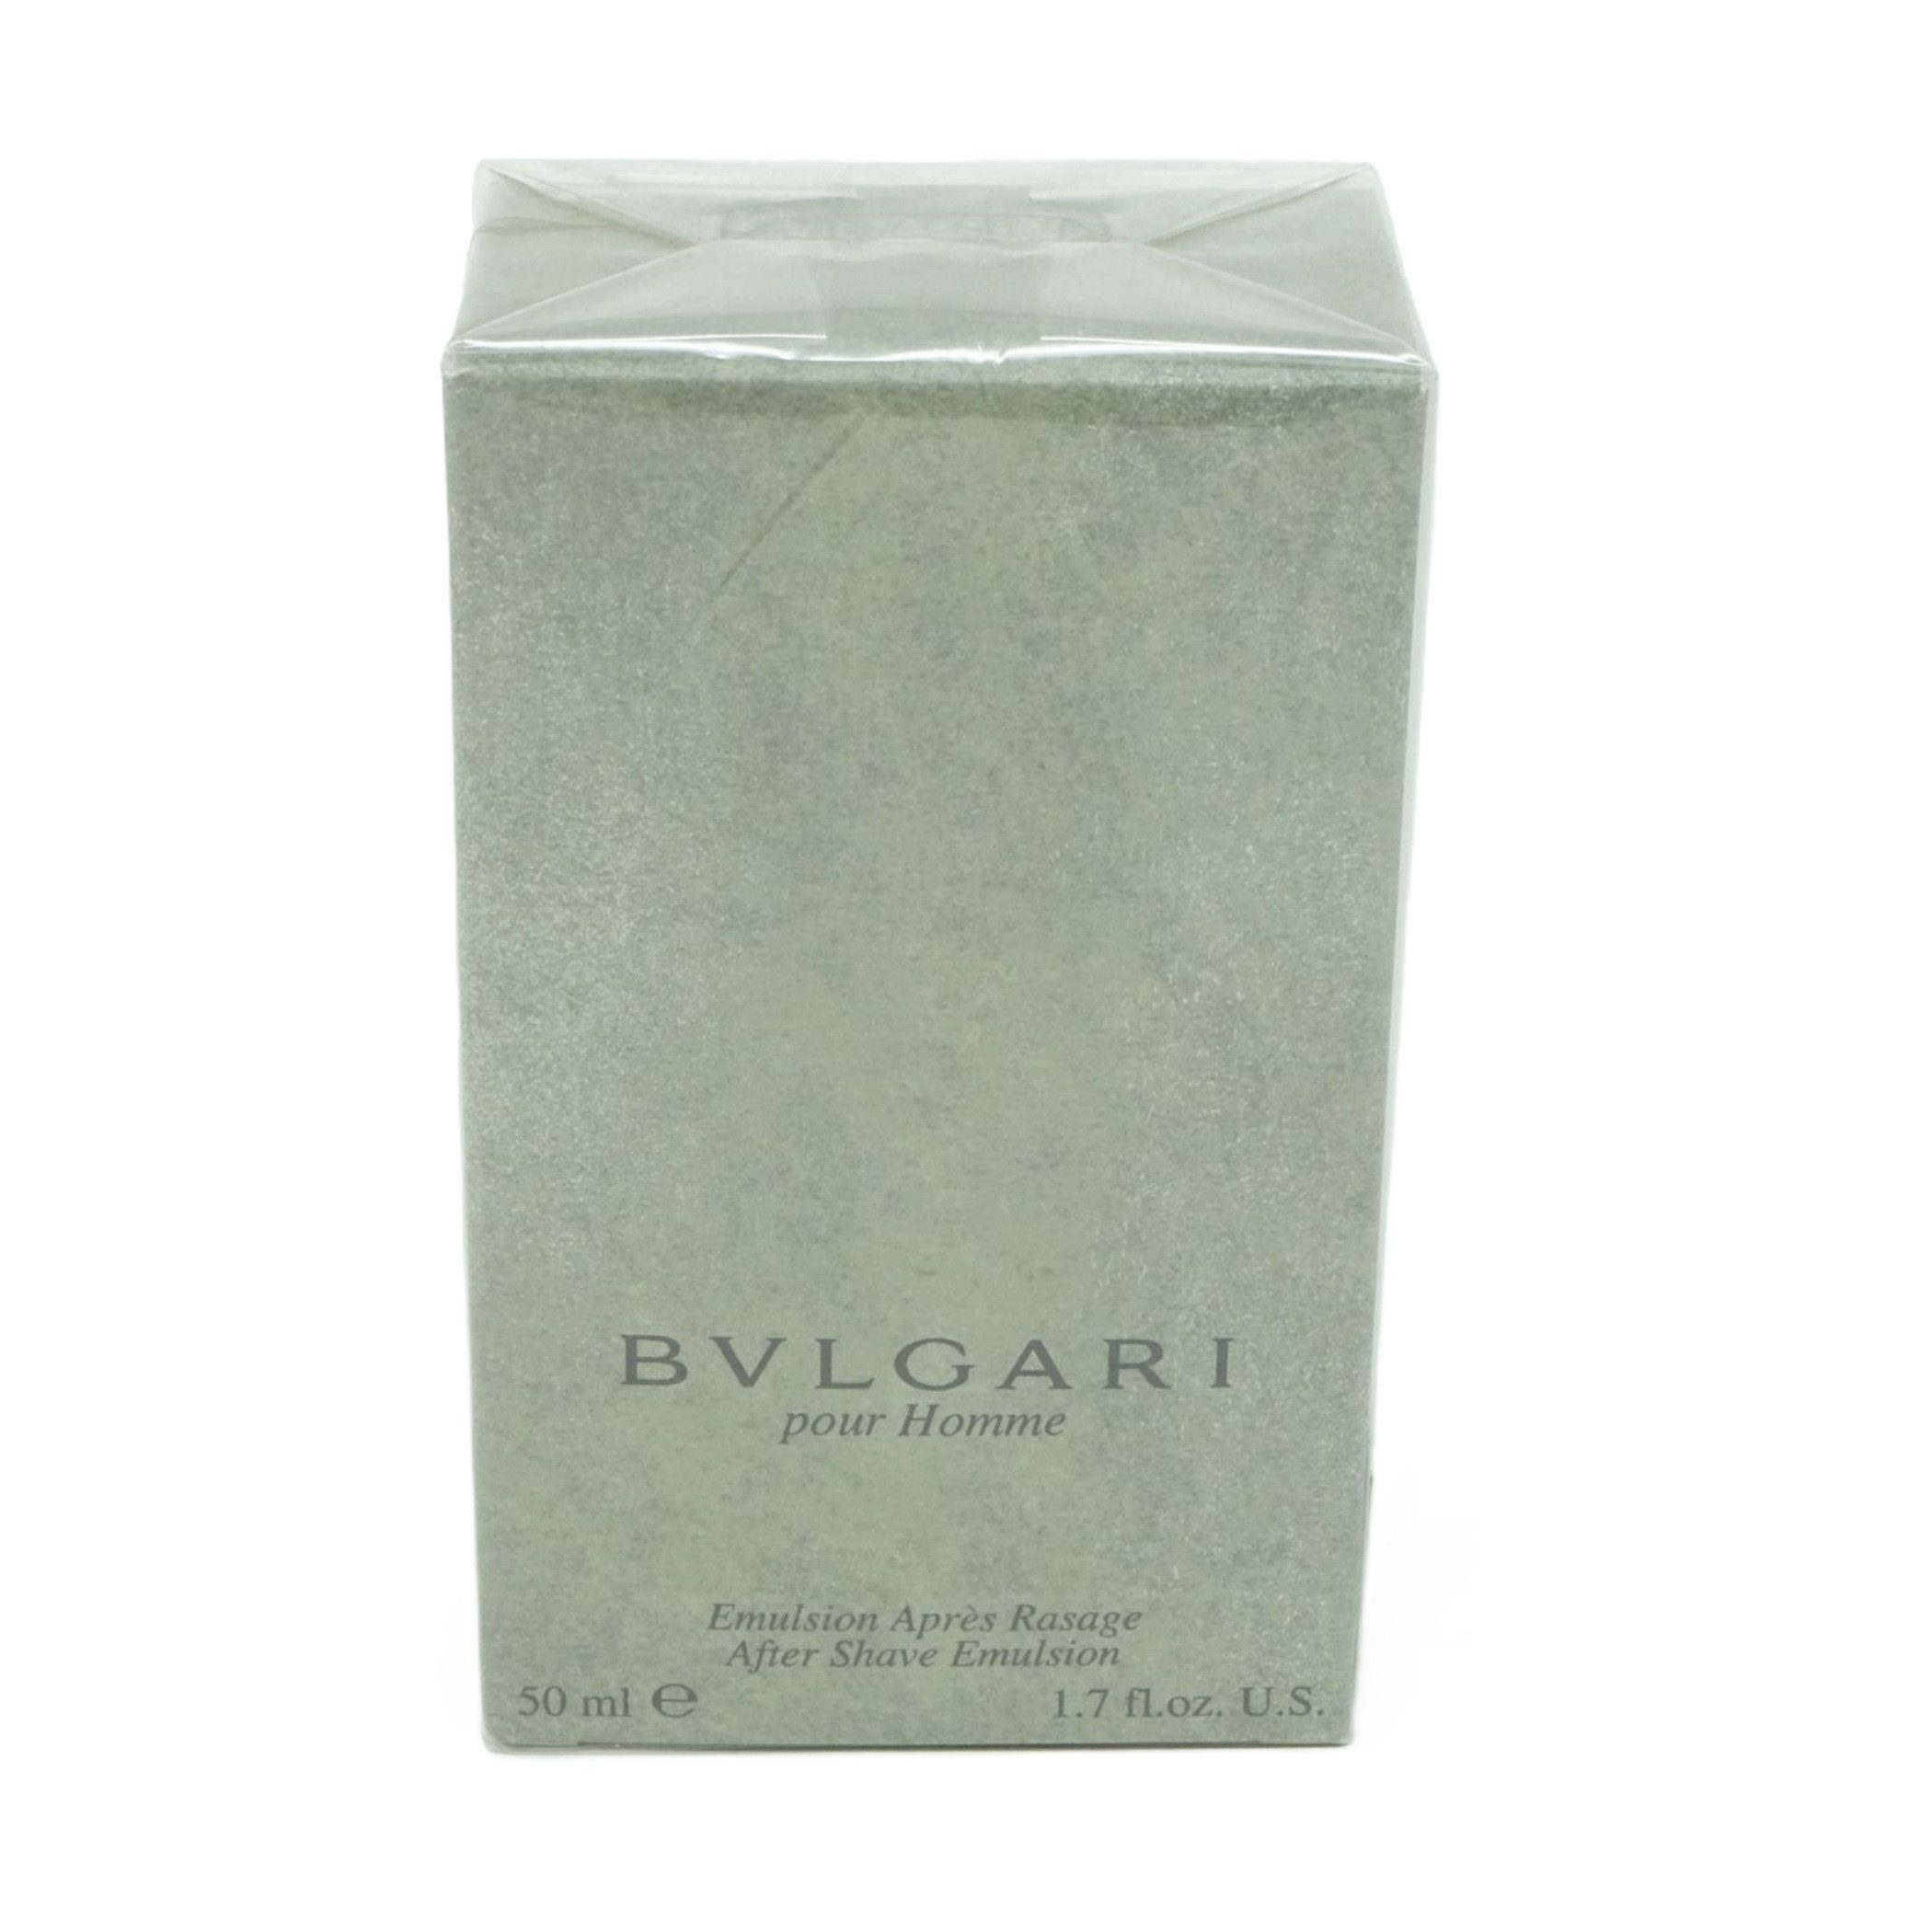 BVLGARI After-Shave BVLGARI POUR HOMME AFTER SHAVE EMULSION 50ml